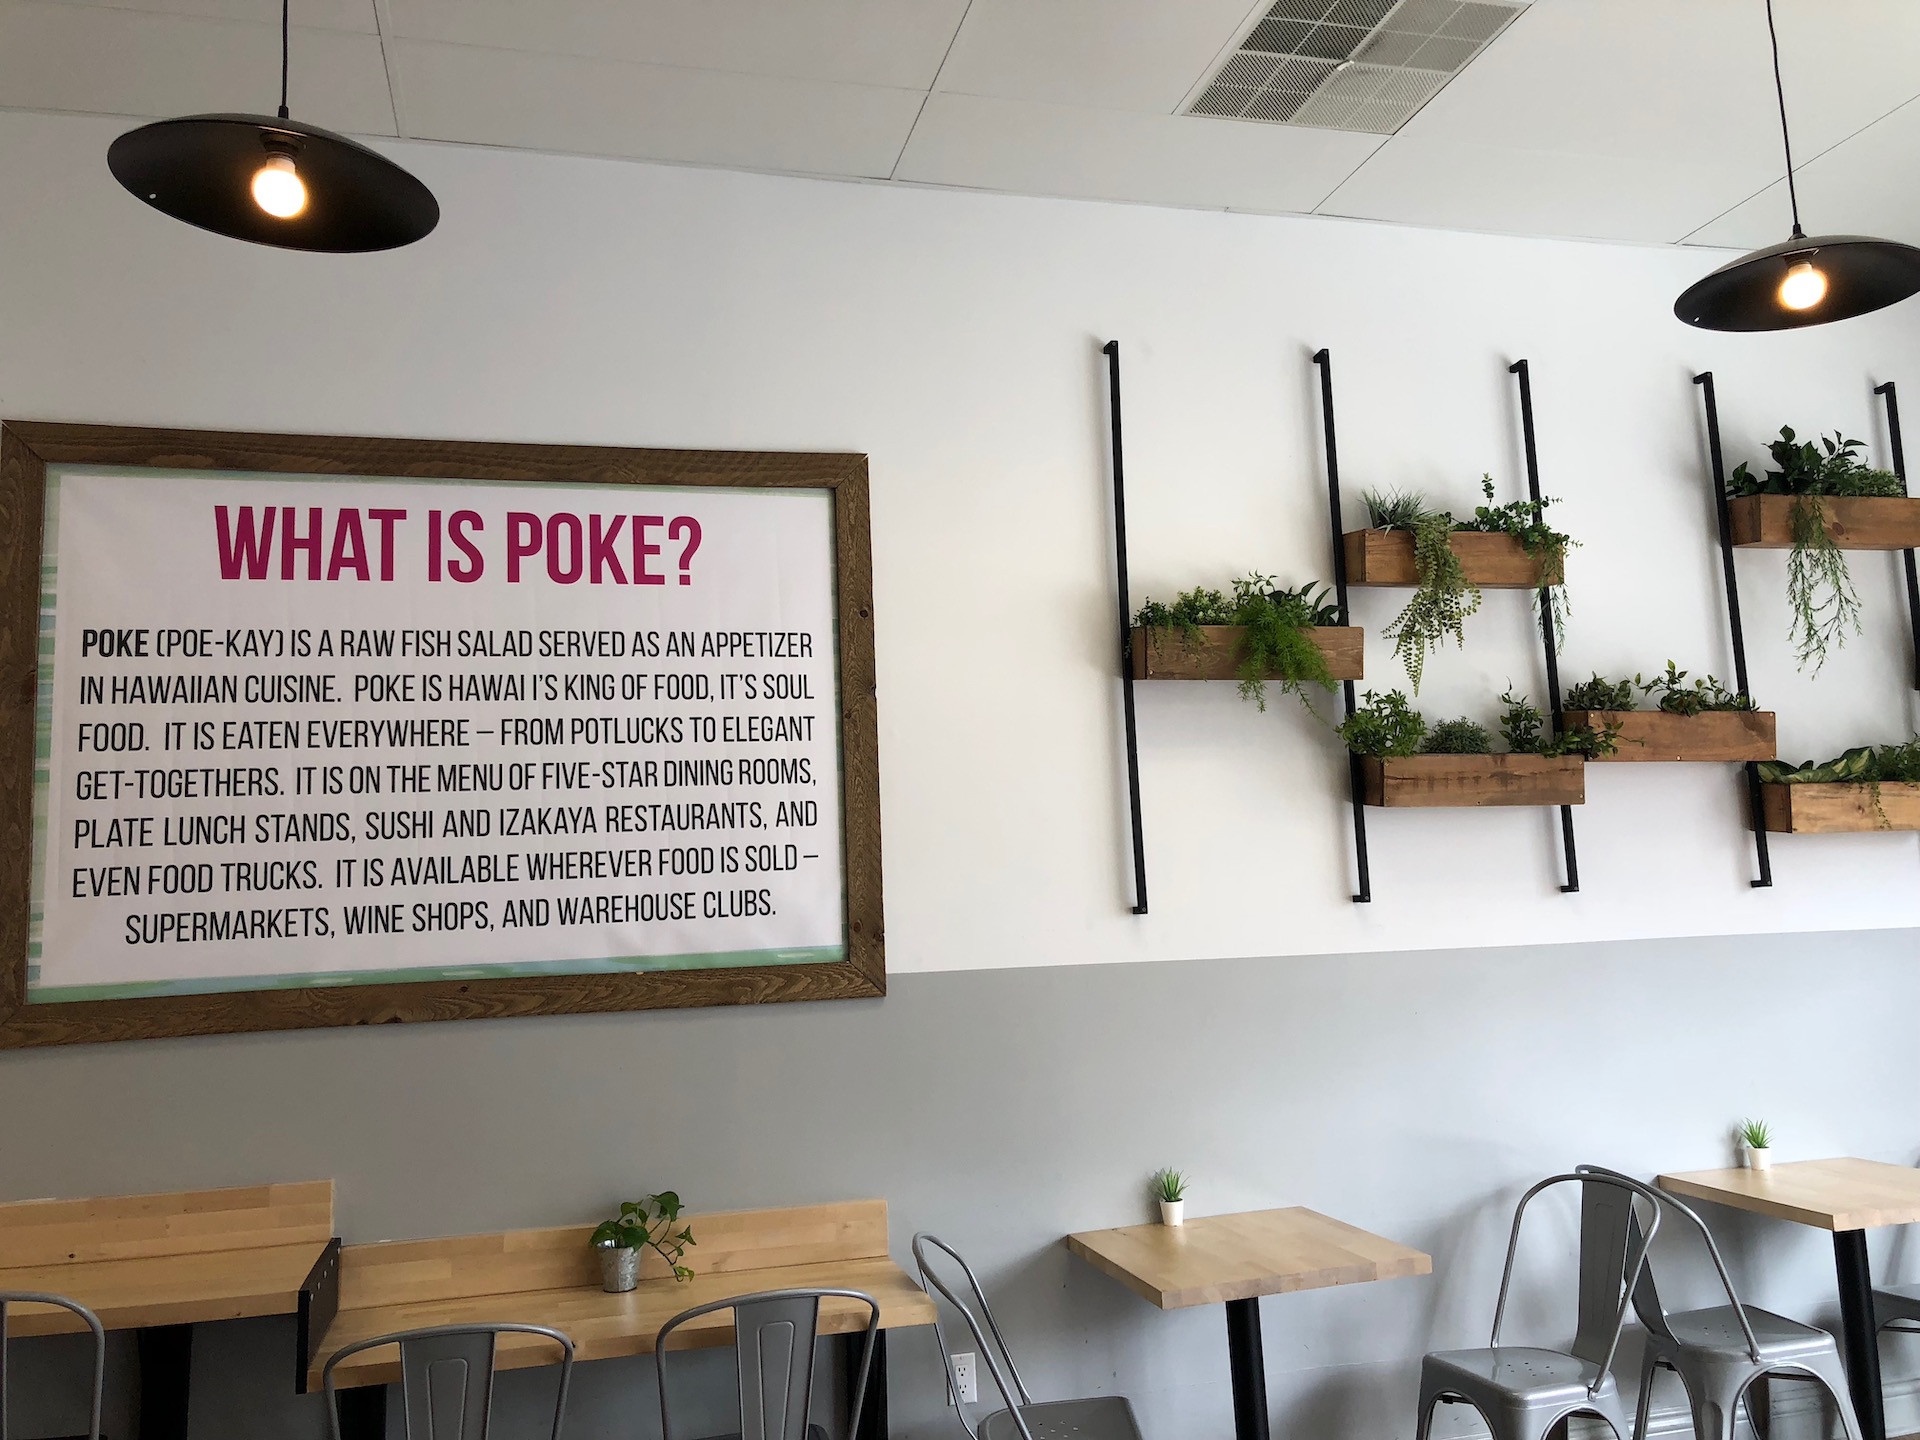 Eating at Sam Choy’s Poke to the Max in San Bruno is a fun—and a learning—experience before or after a flight.